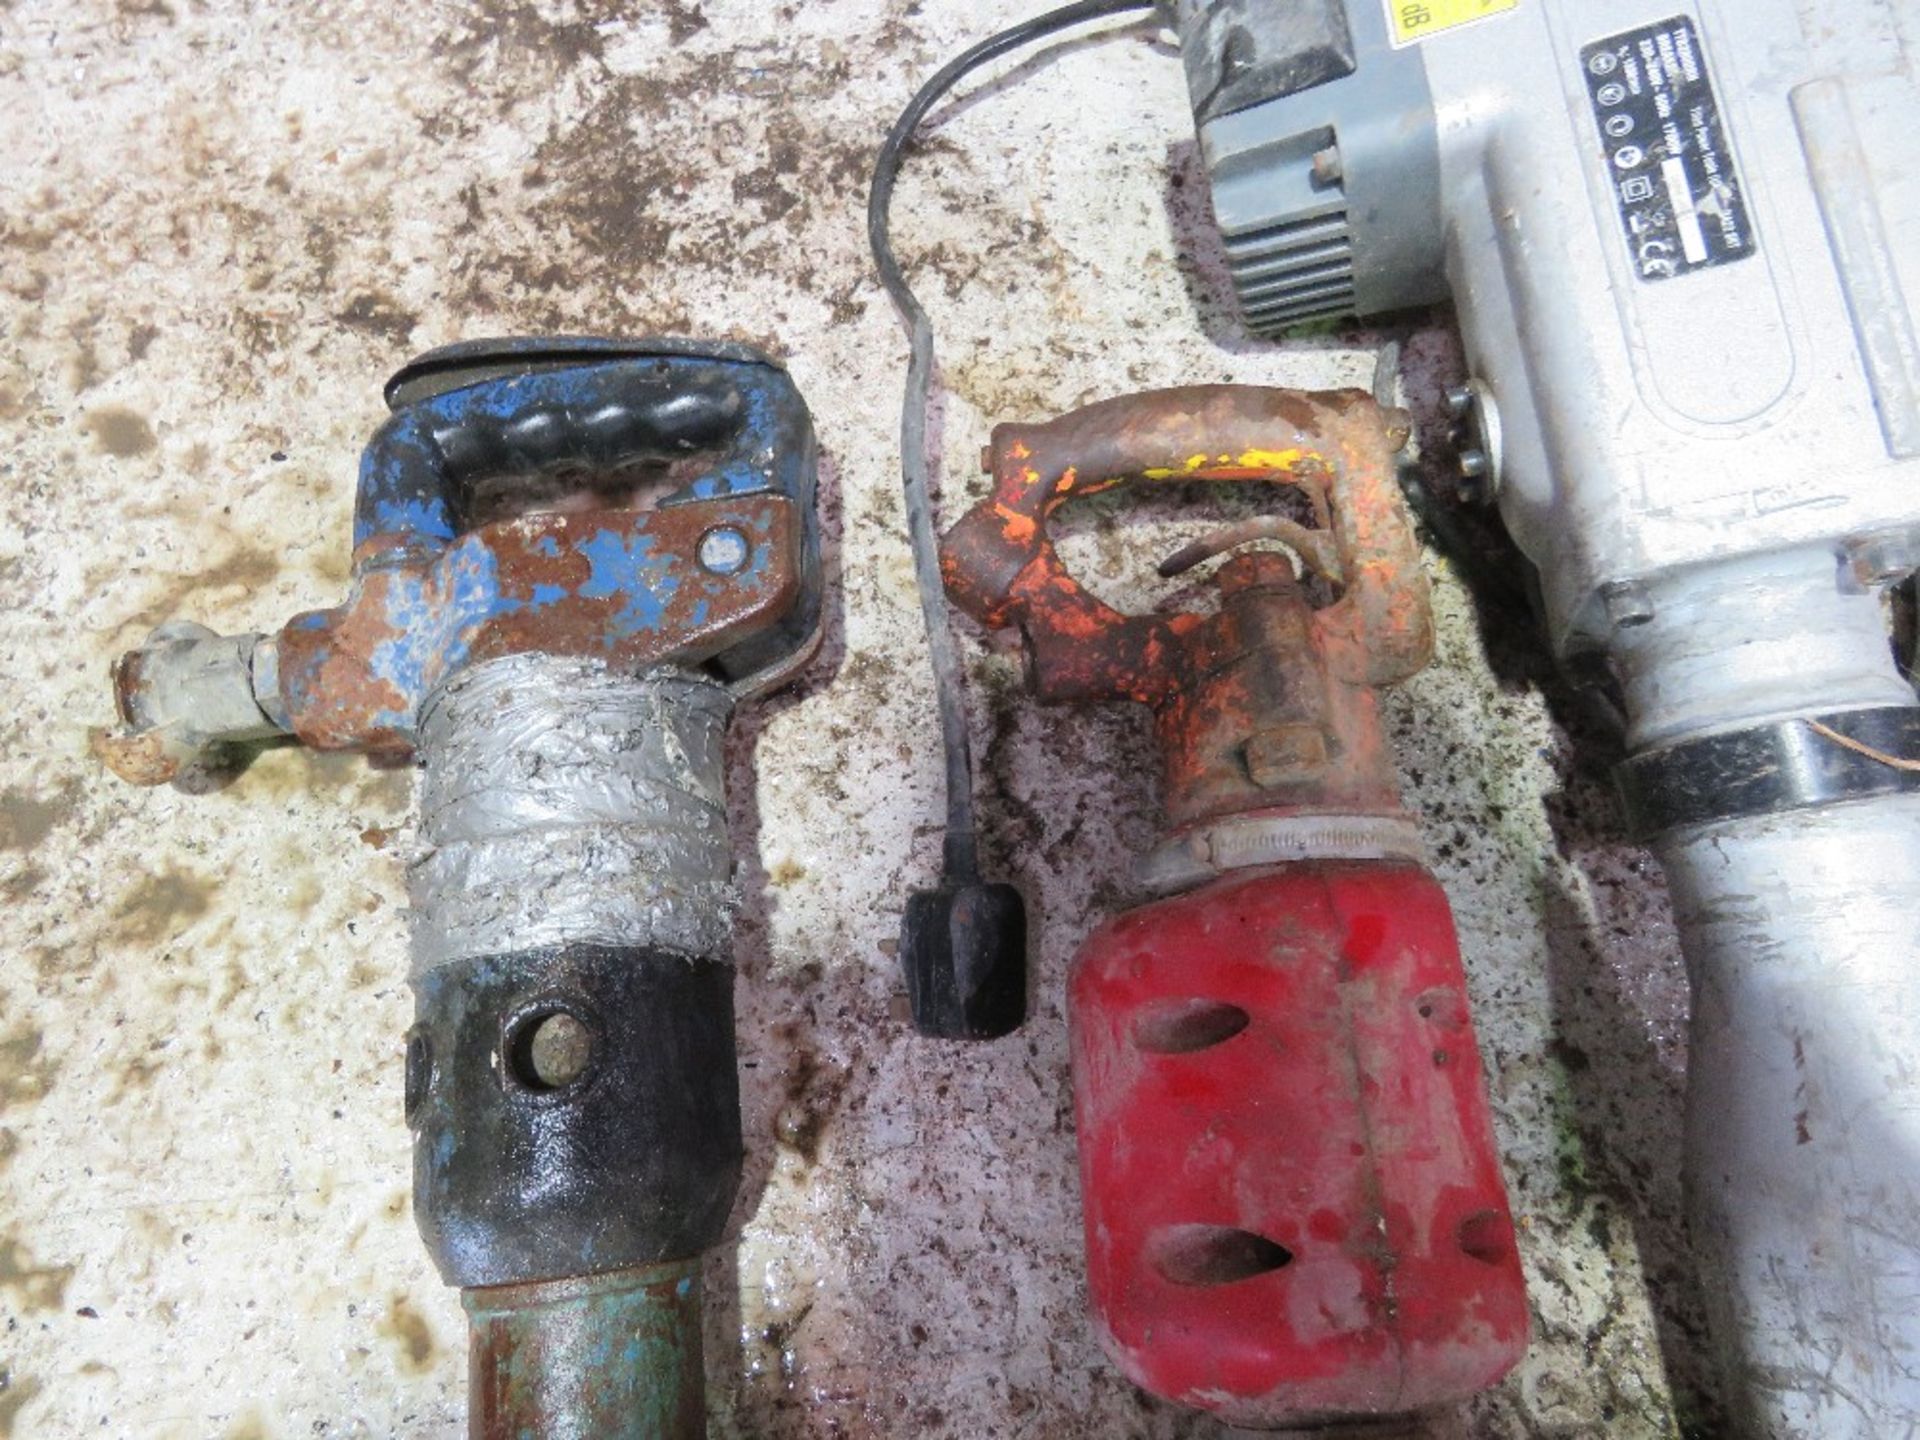 2 X AIR PICKS / DEMOLITION HAMMERS PLUS A TITAN 240VOLT BREAKER.....THIS LOT IS SOLD UNDER THE AUCTI - Image 5 of 7